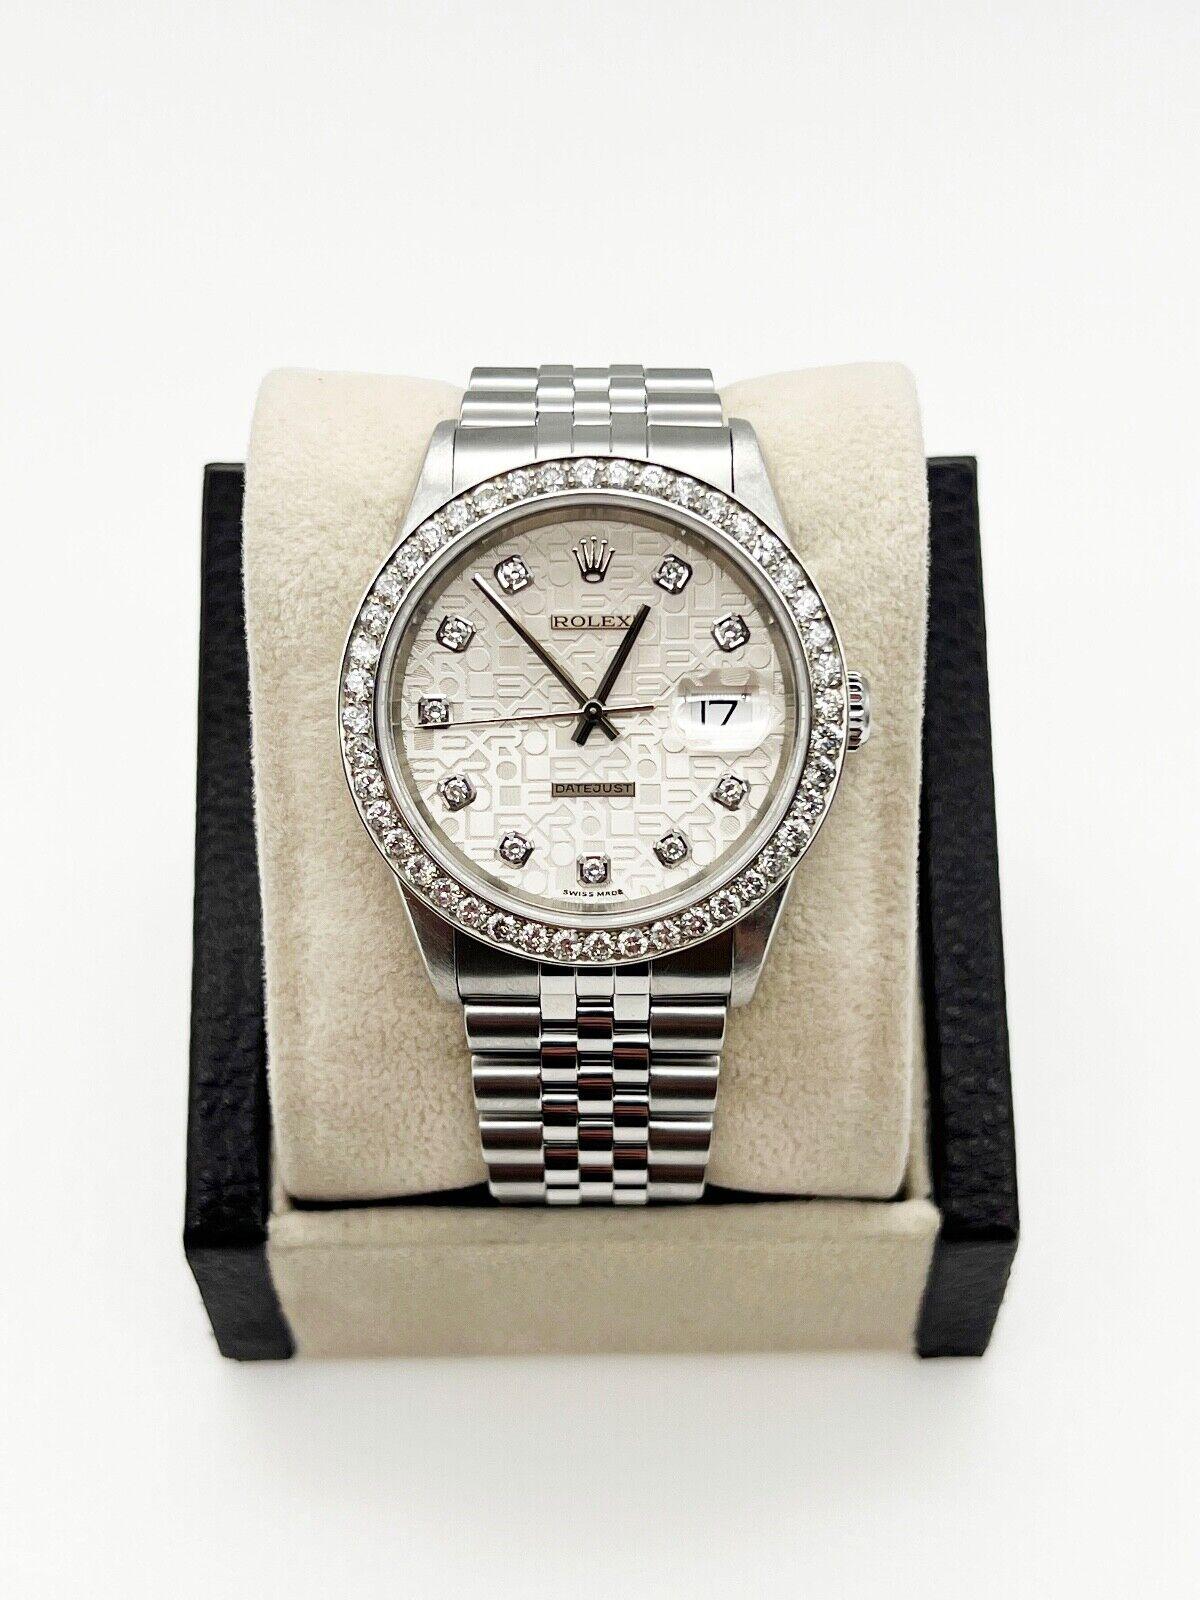 Style Number: 16234

Serial: K933***

Year: 2001
 
Model: Datejust
 
Case Material: Stainless Steel 
 
Band: Stainless Steel
  
Bezel: Custom Diamond Bezel
 
Dial: Custom Diamond Jubilee Dial
 
Face: Sapphire Crystal
 
Case Size: 36mm
 
Includes: